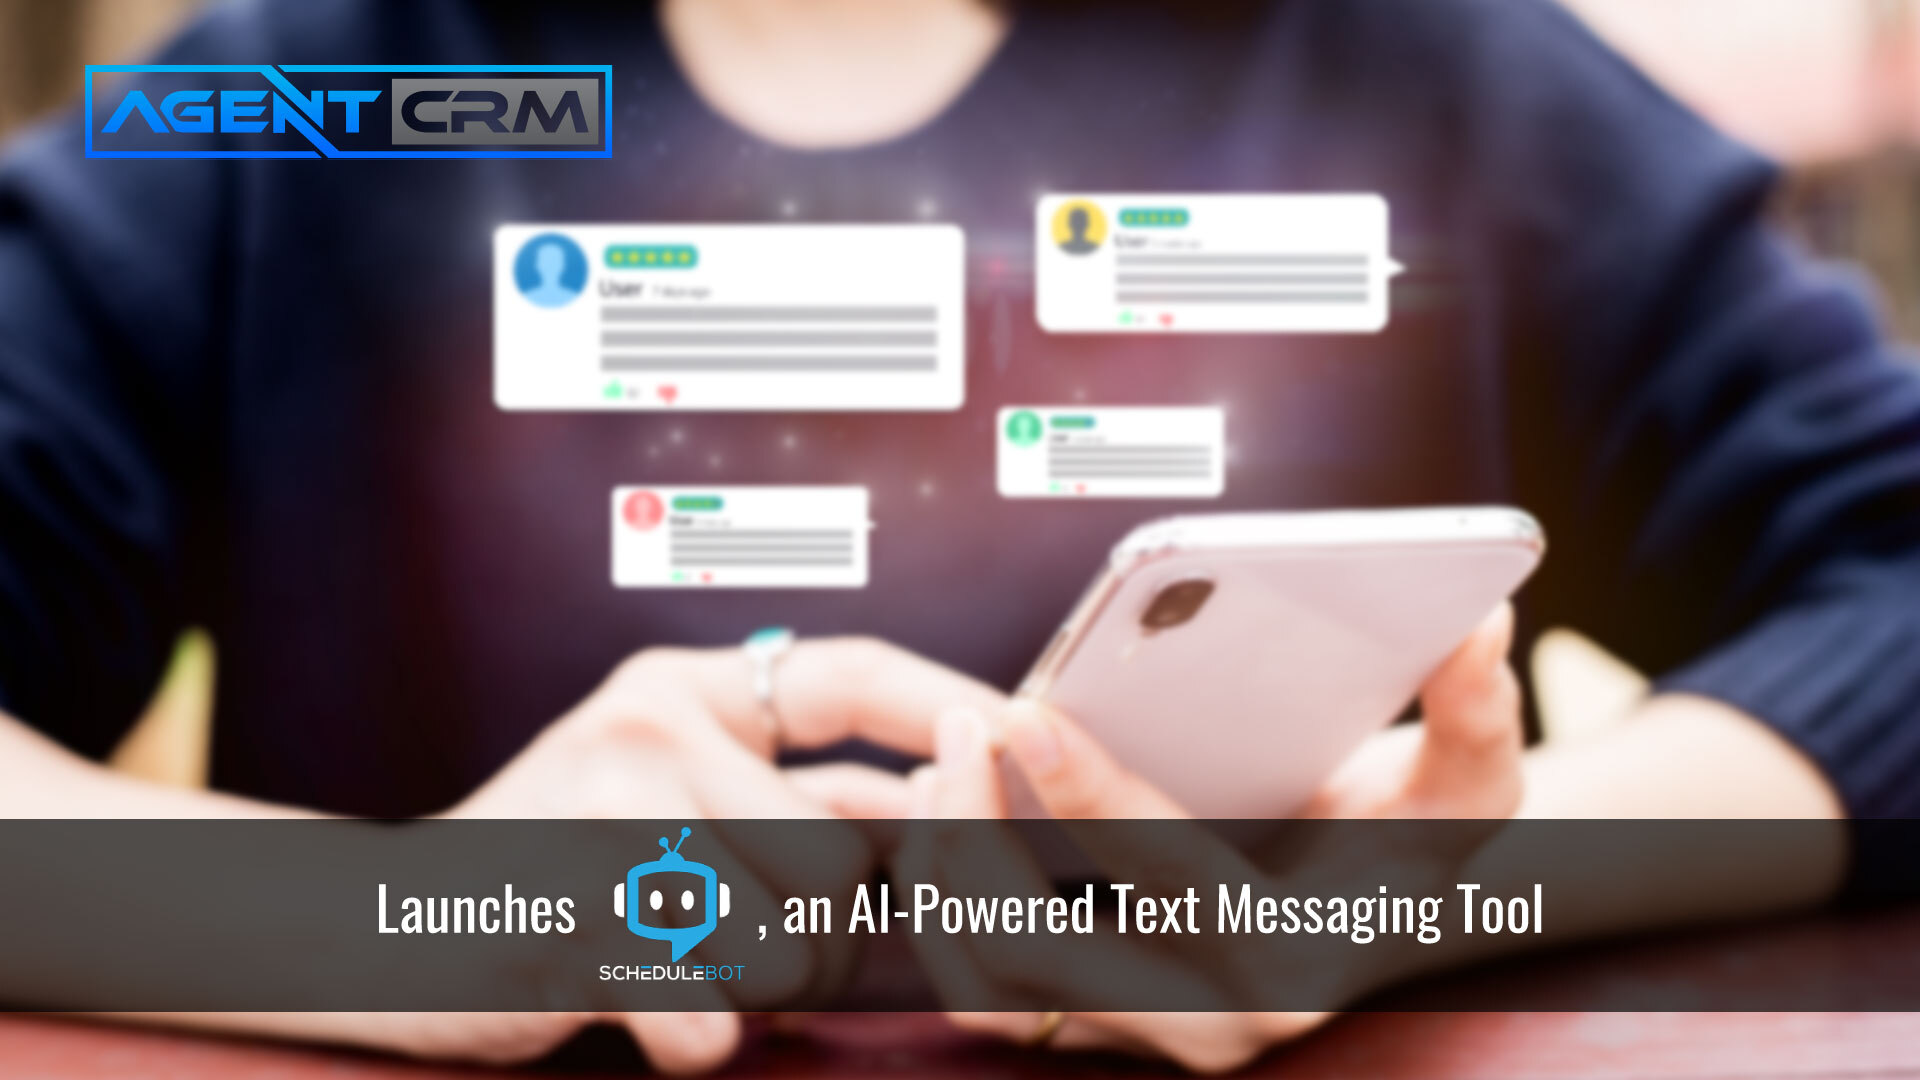 Agent CRM Launches ScheduleBot - AI-Powered Text Messaging Tool